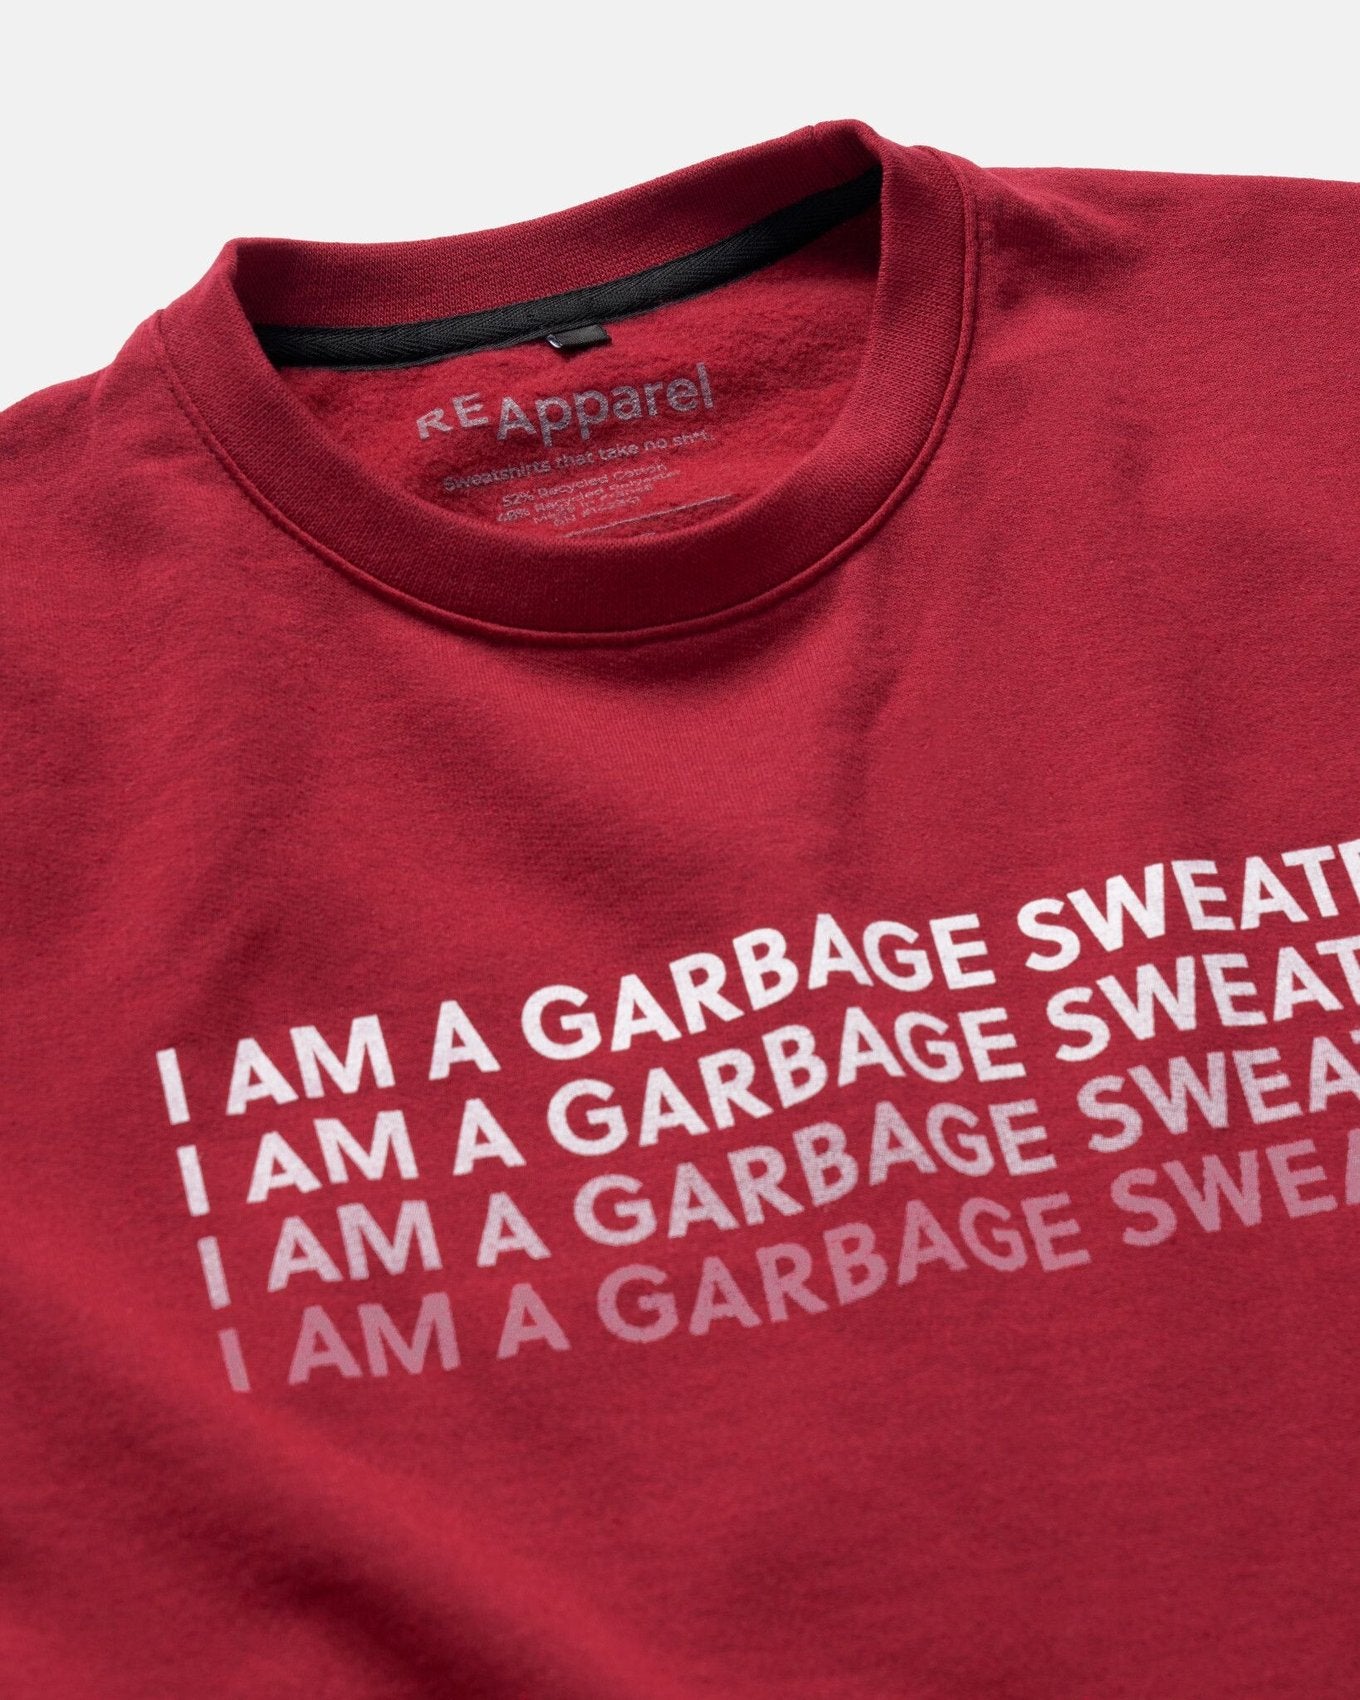 ReApparel Garbage Crew Neck . in color Garnet and shape long sleeve